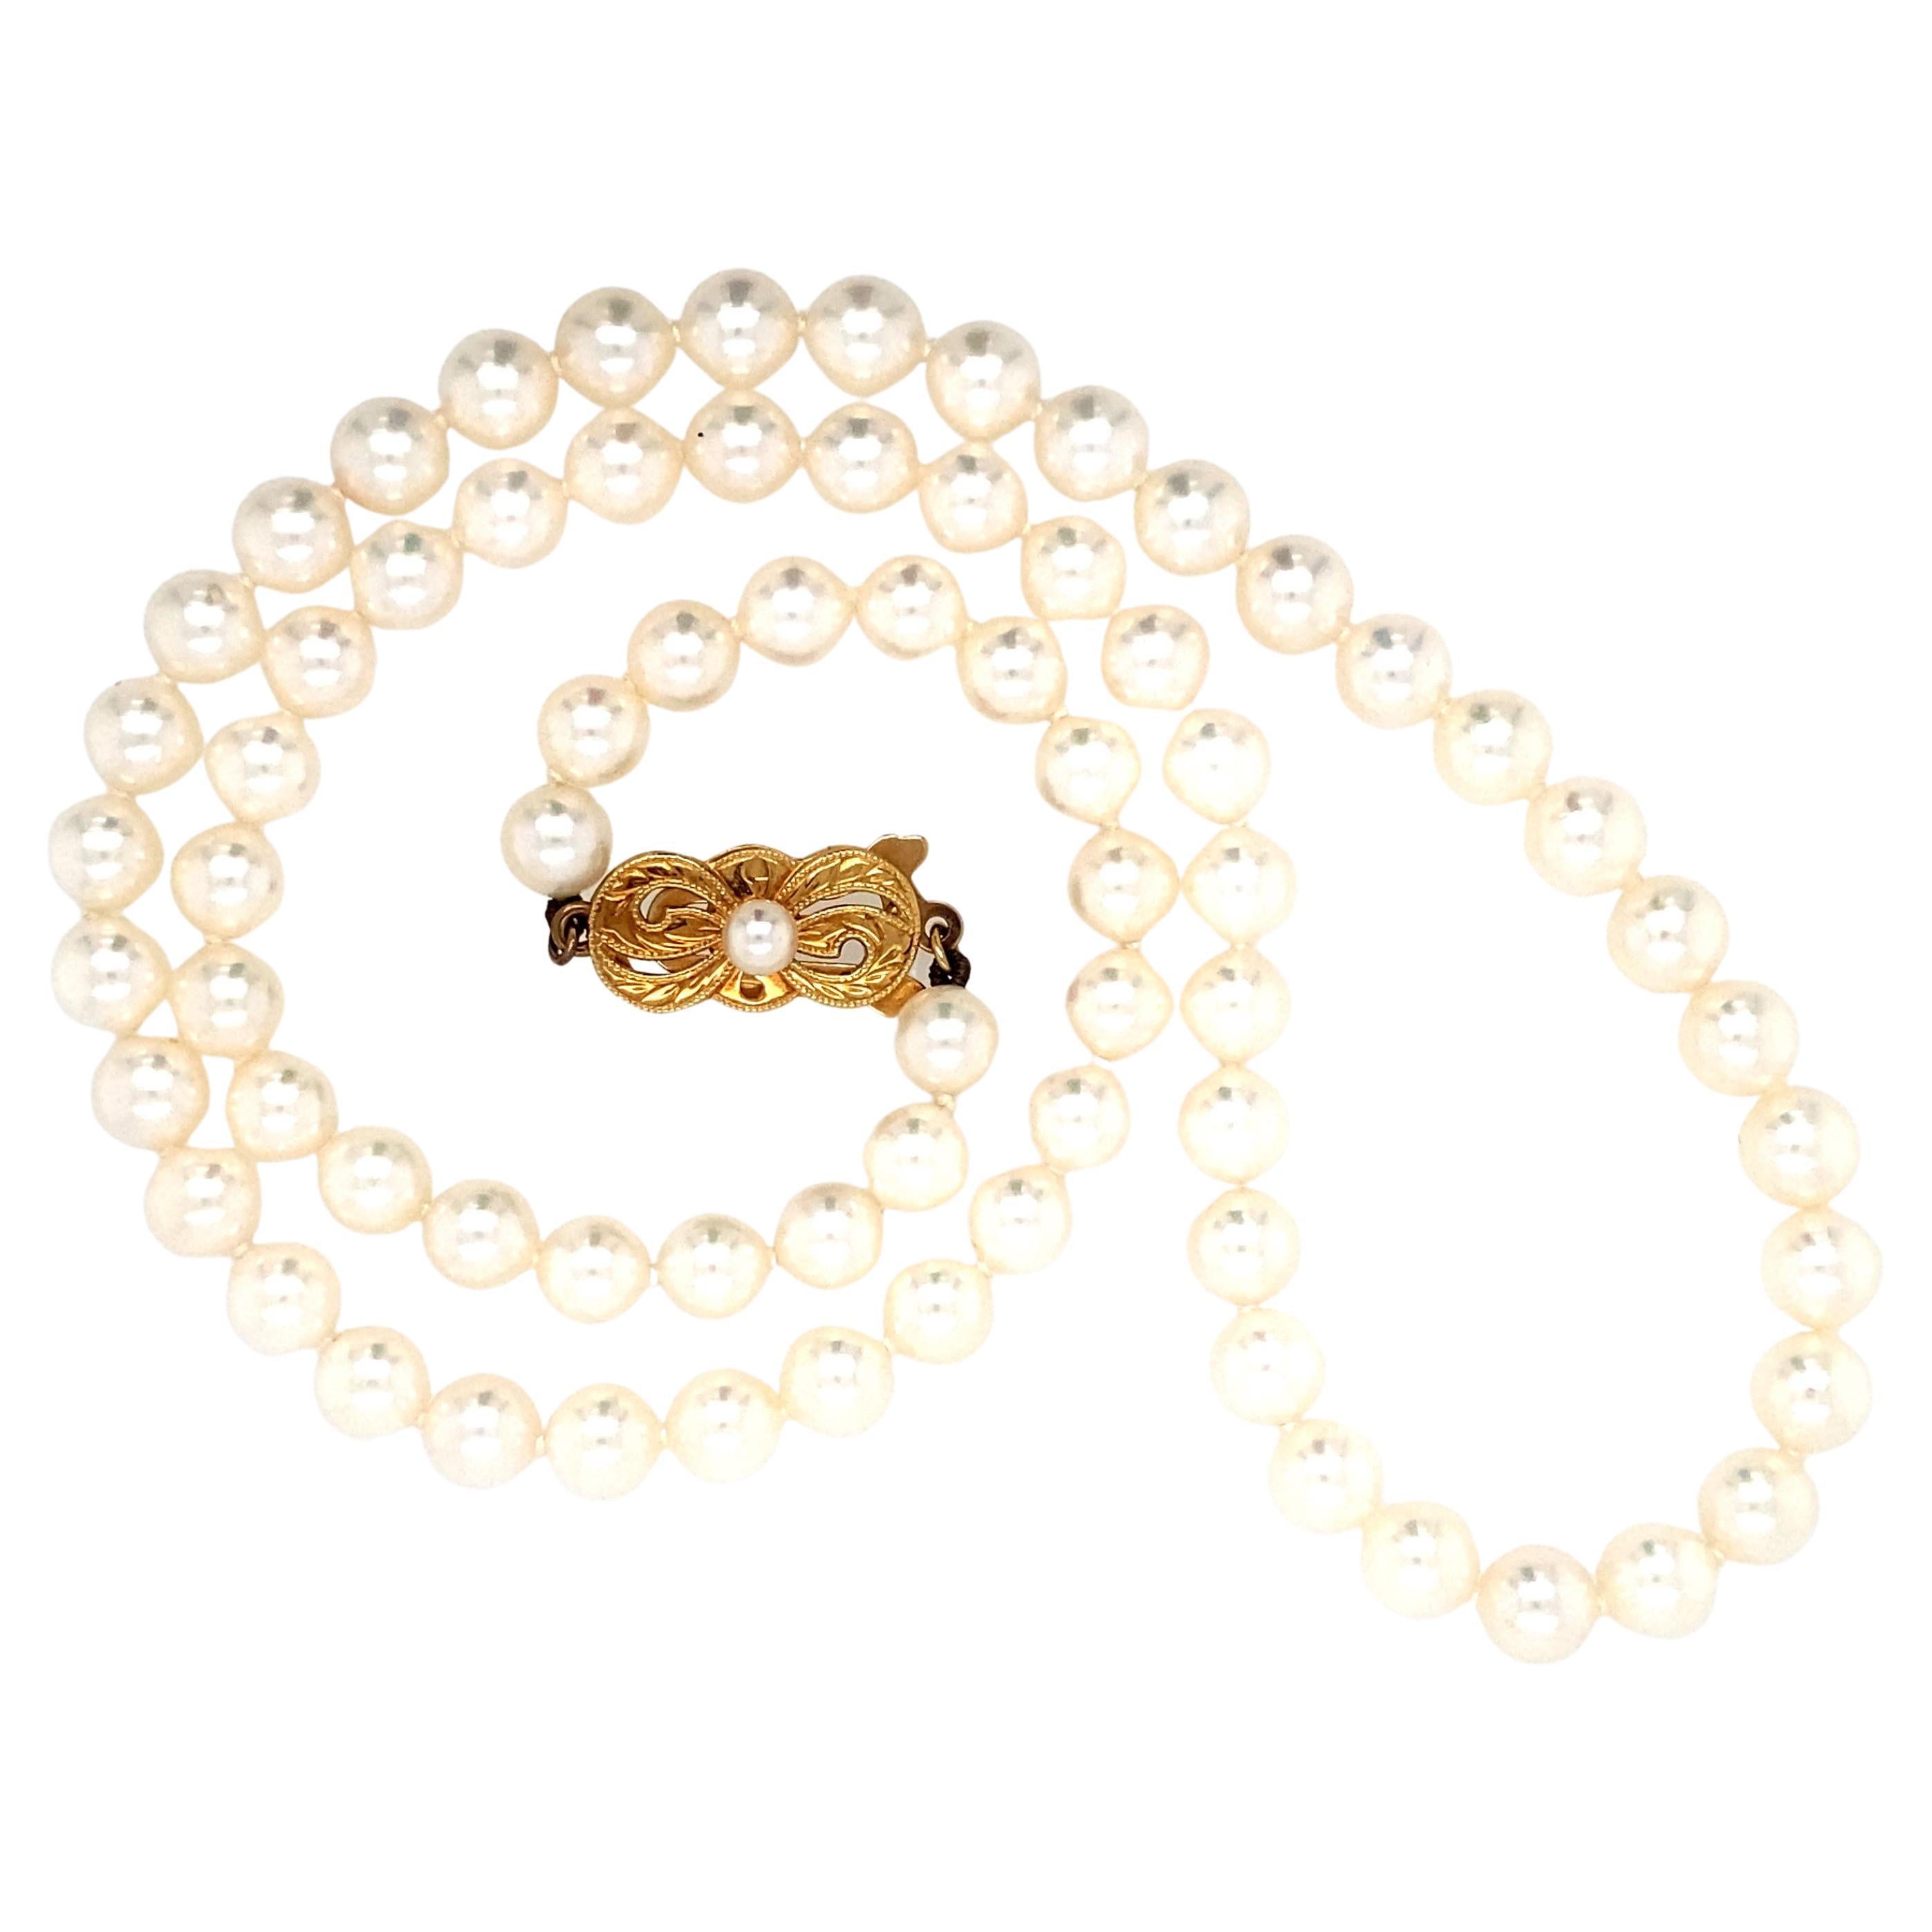 Vintage 1970s Mikimoto Pearl Strand Necklace